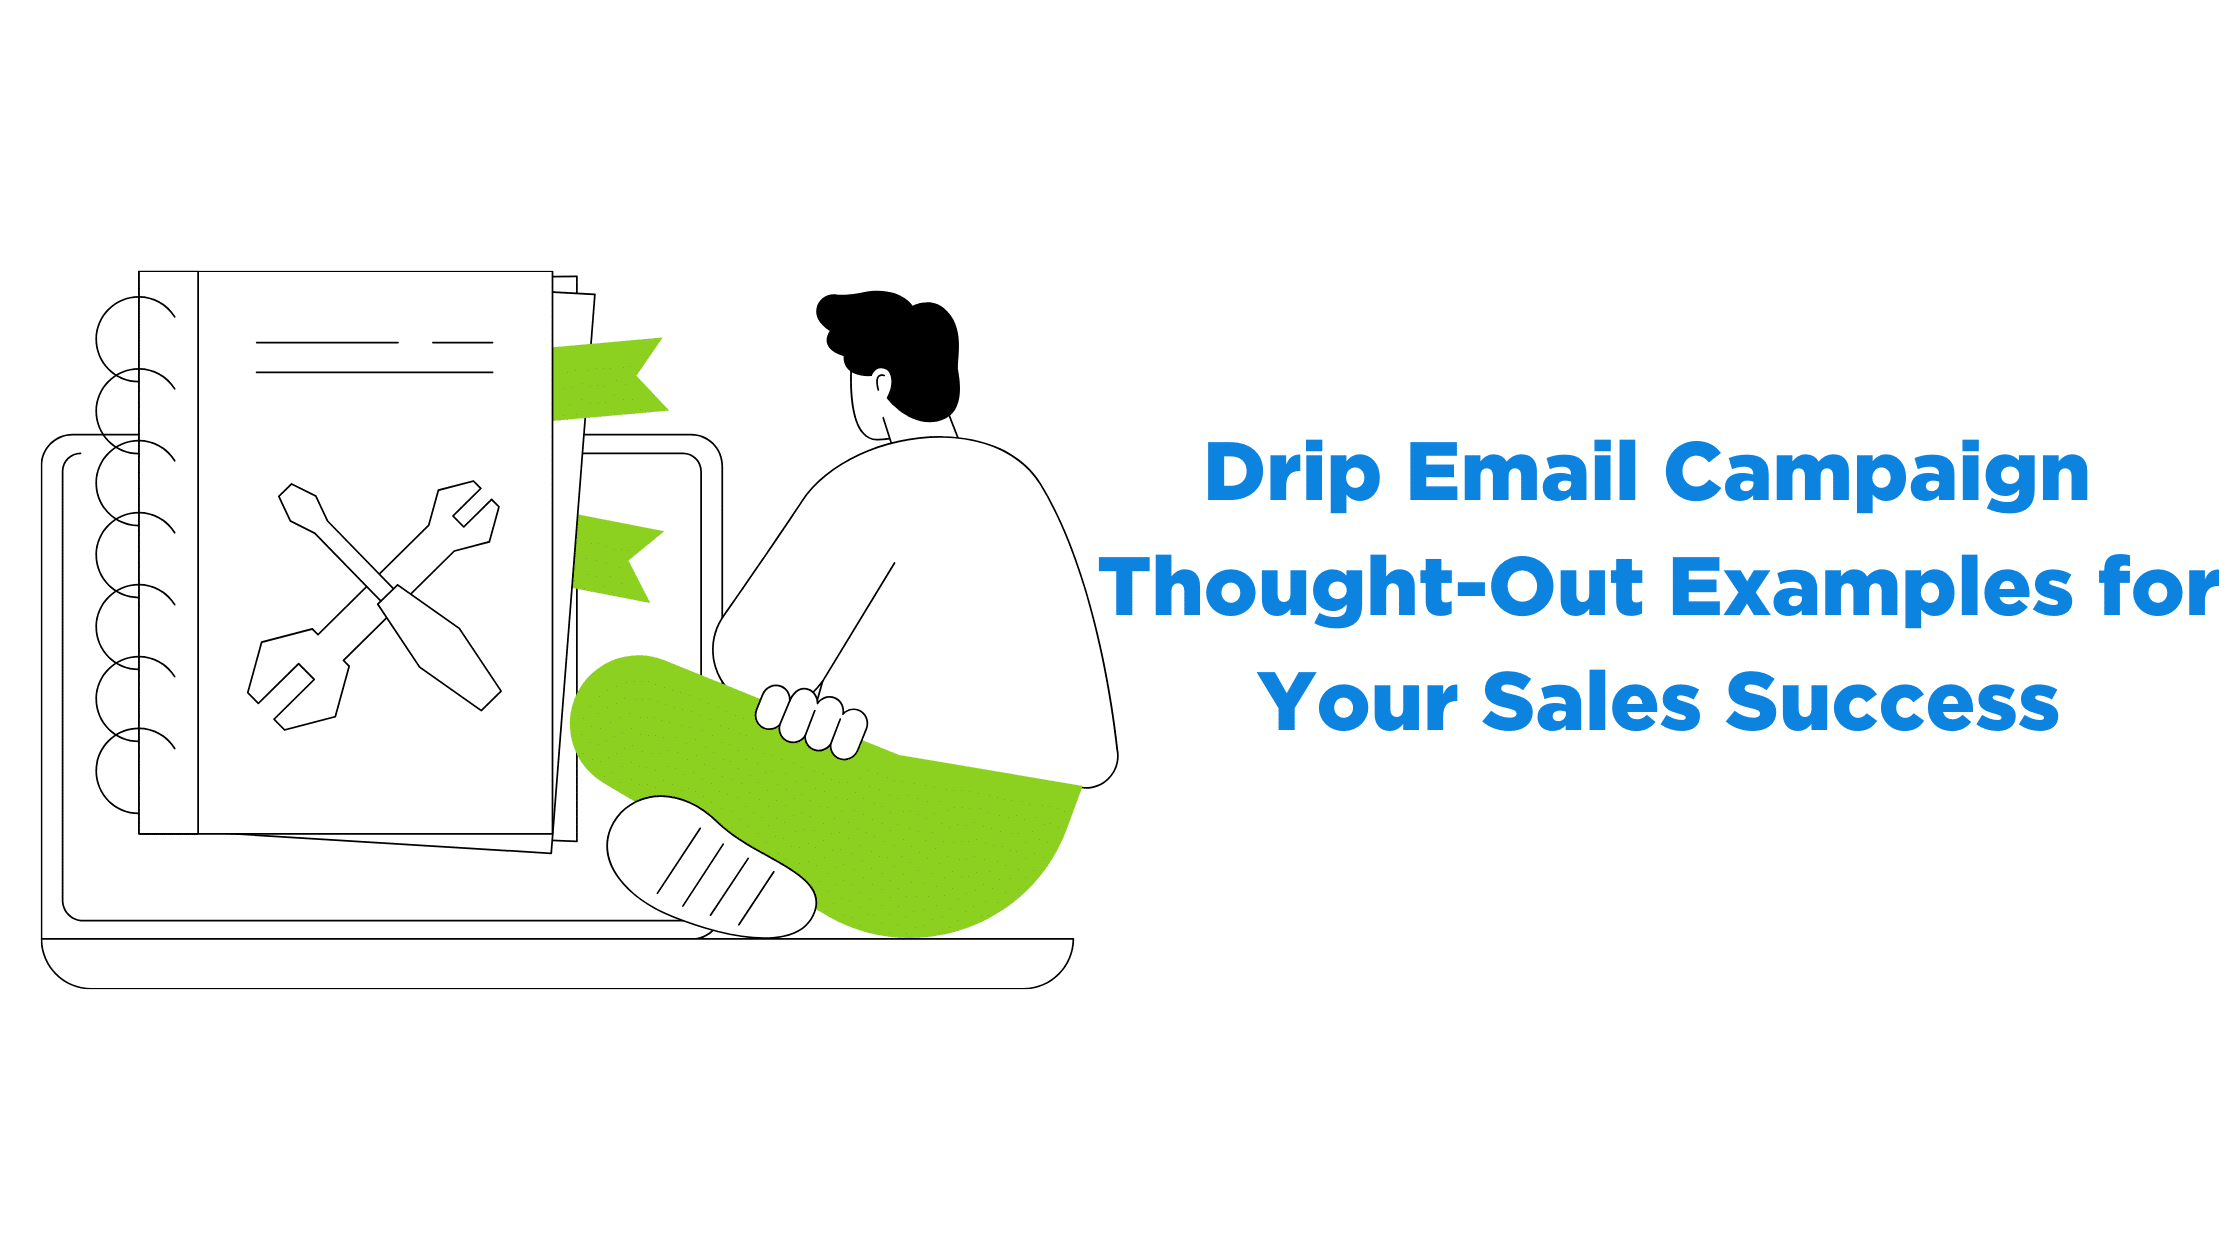 Drip-Email-Campaign-Thought-Out-Examples-for-Your-Sales-Success